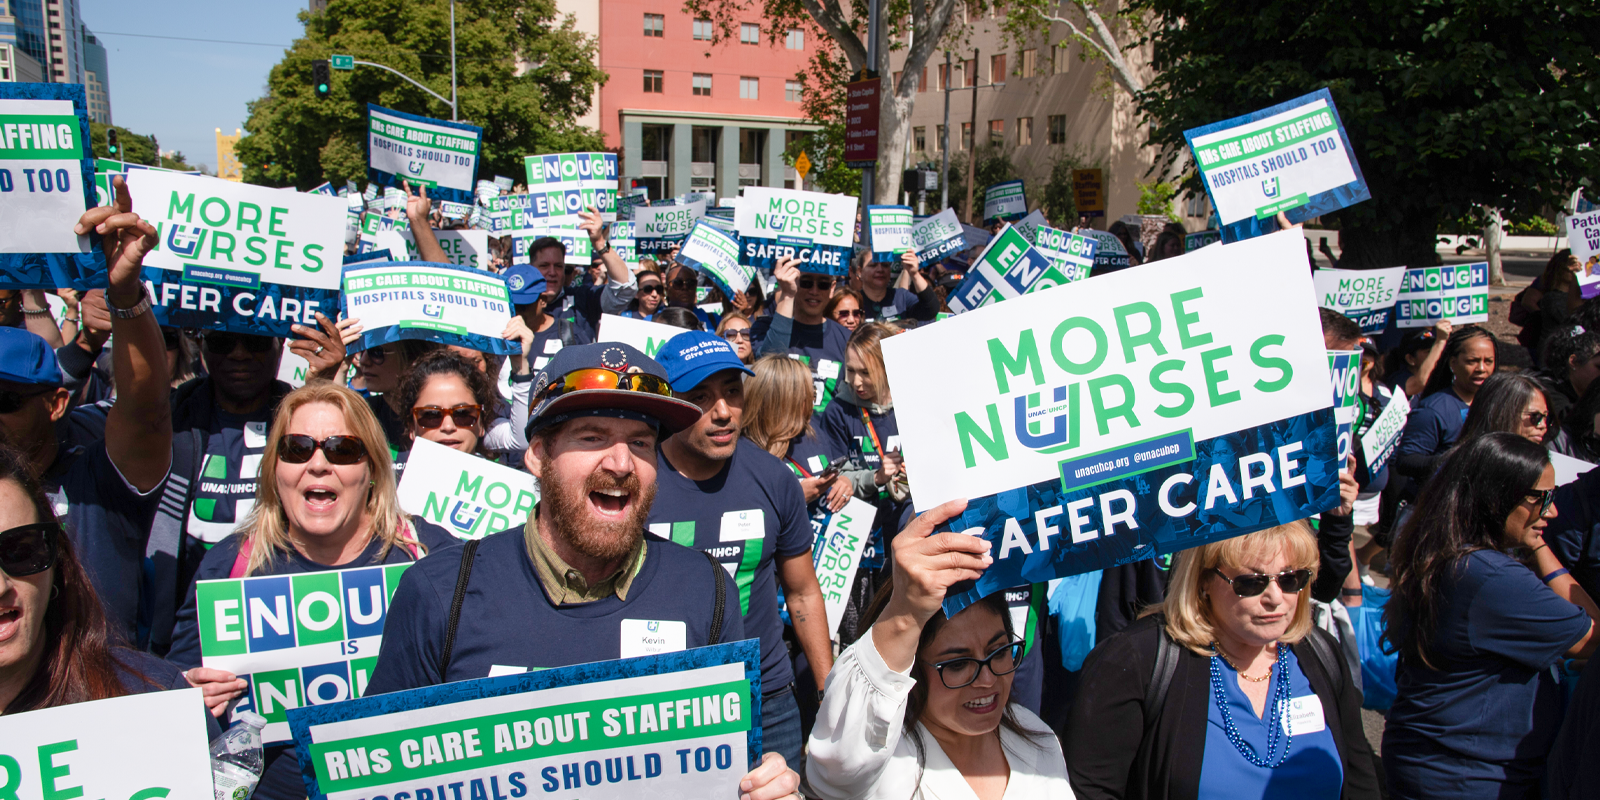 In California rally, nurses seek investment, legislation to end staffing crisis by 2030